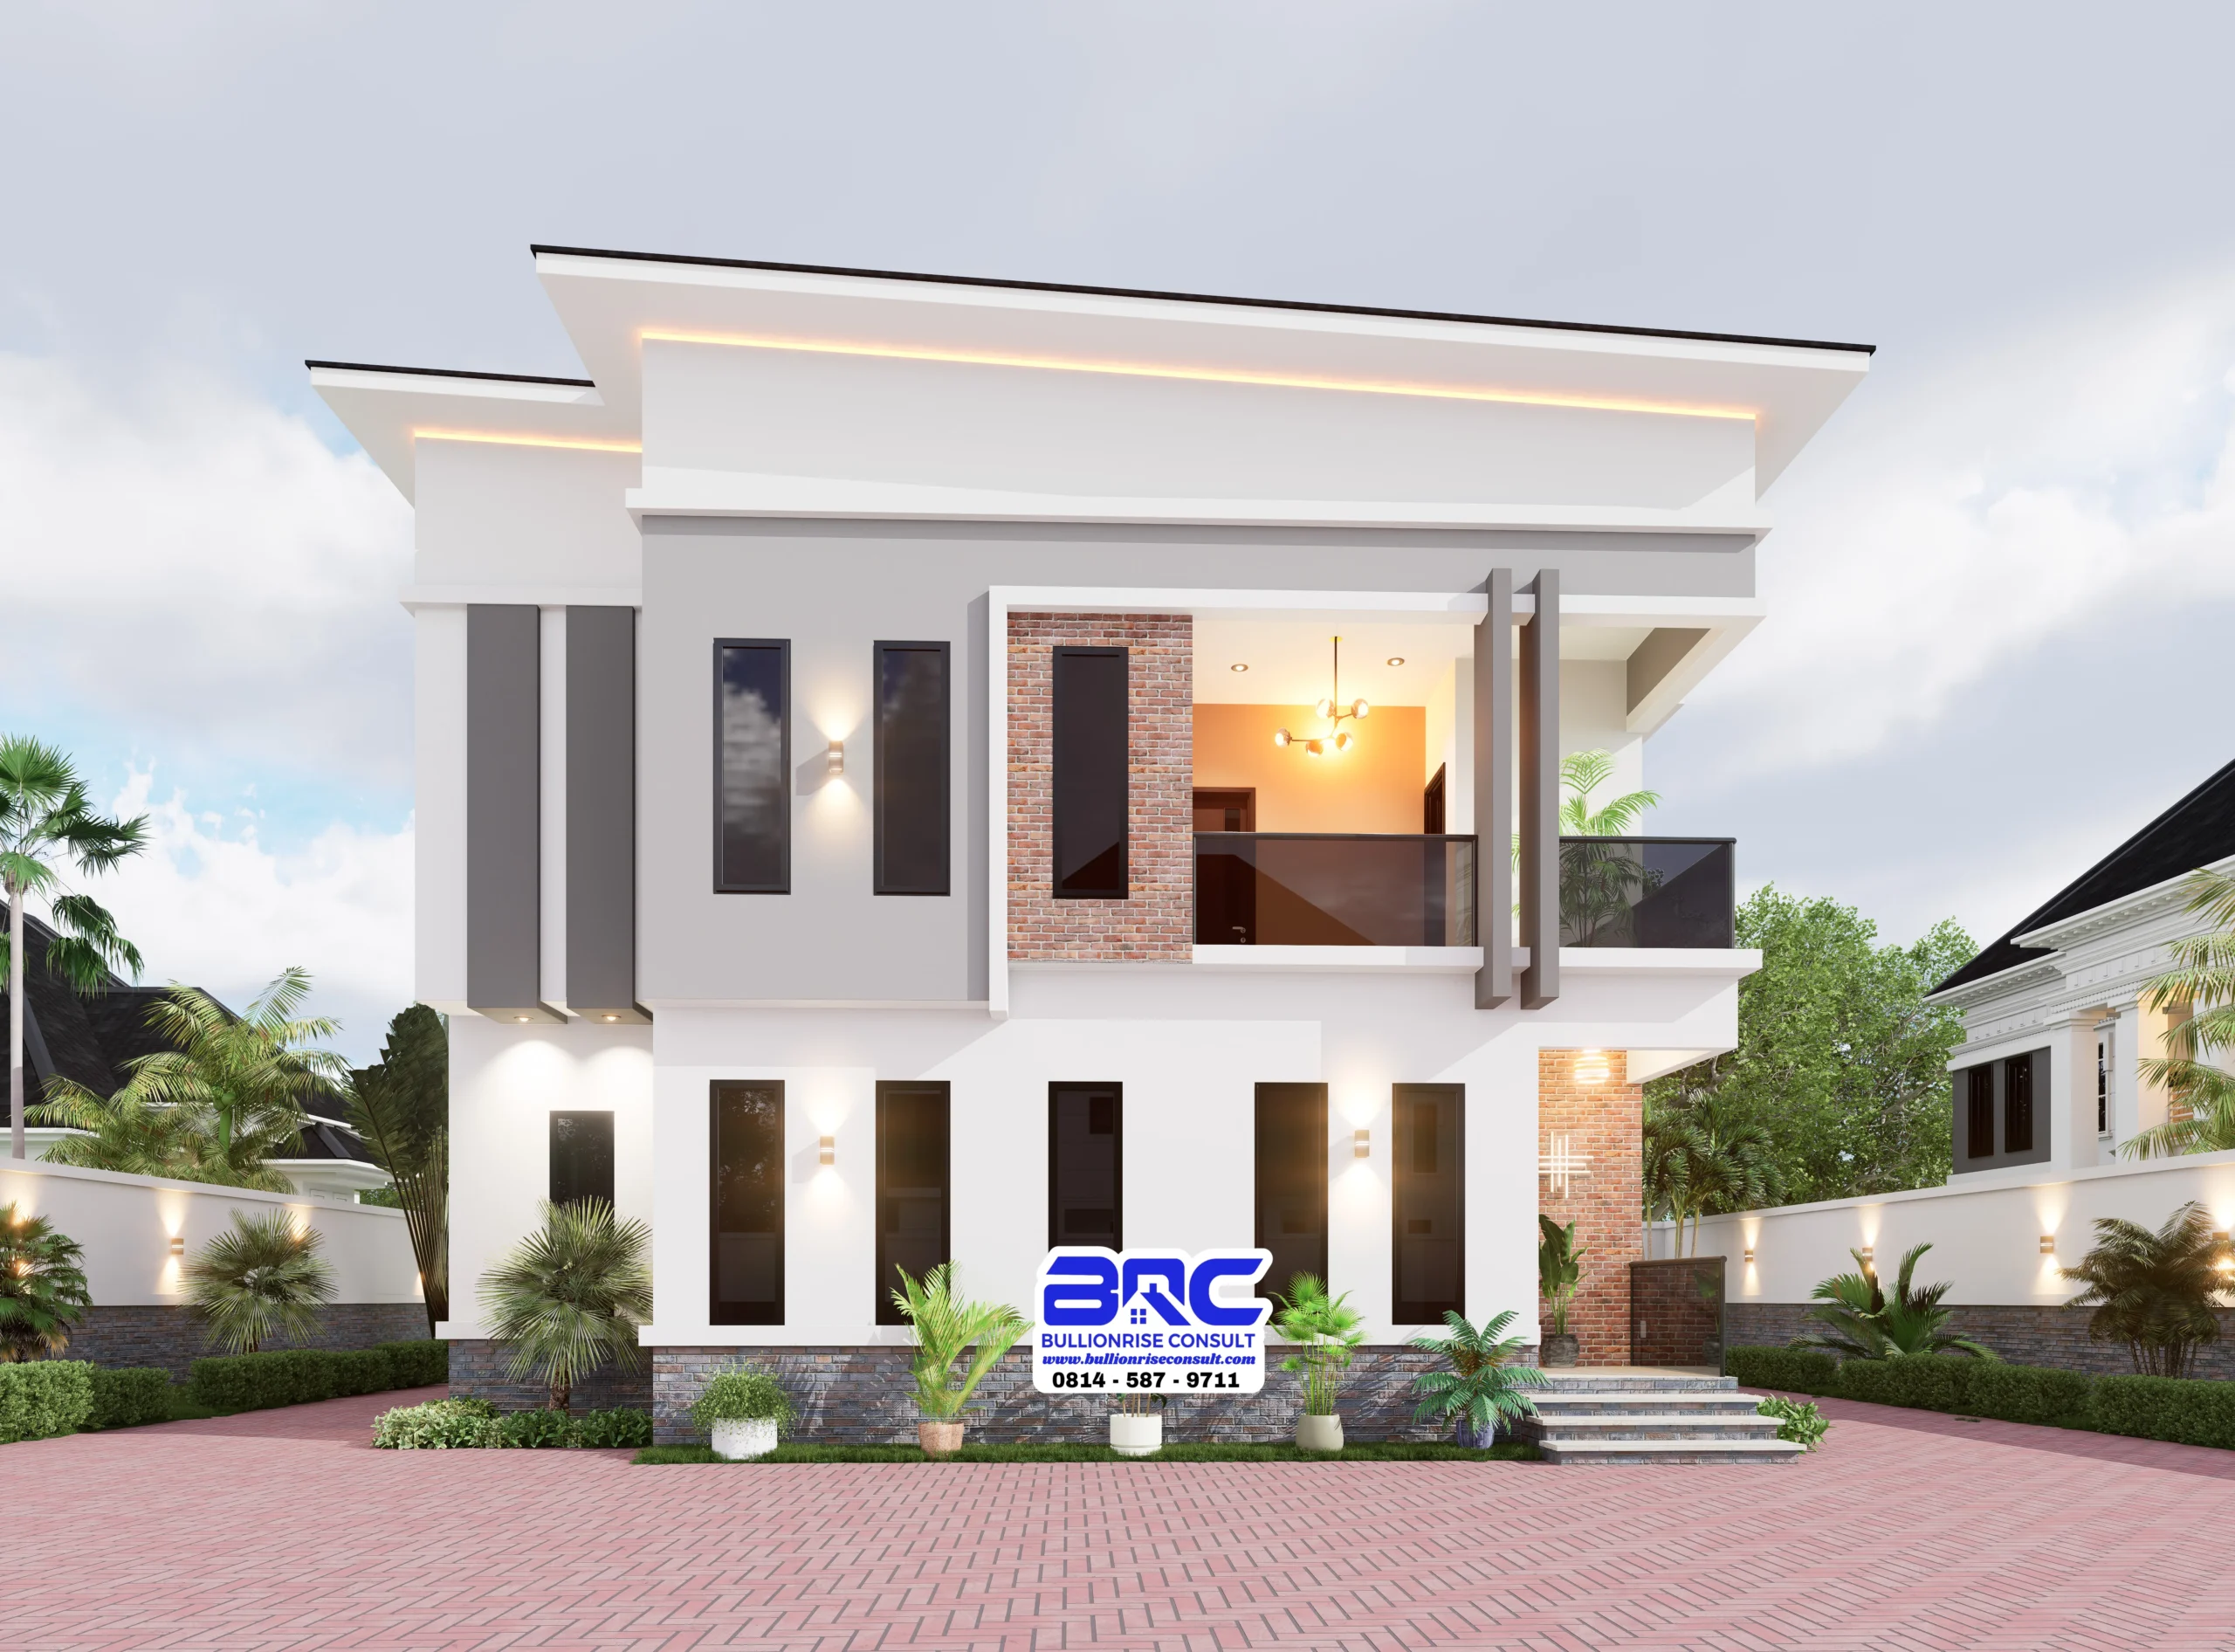 4 bedroom duplex with gym house plan in nigeria